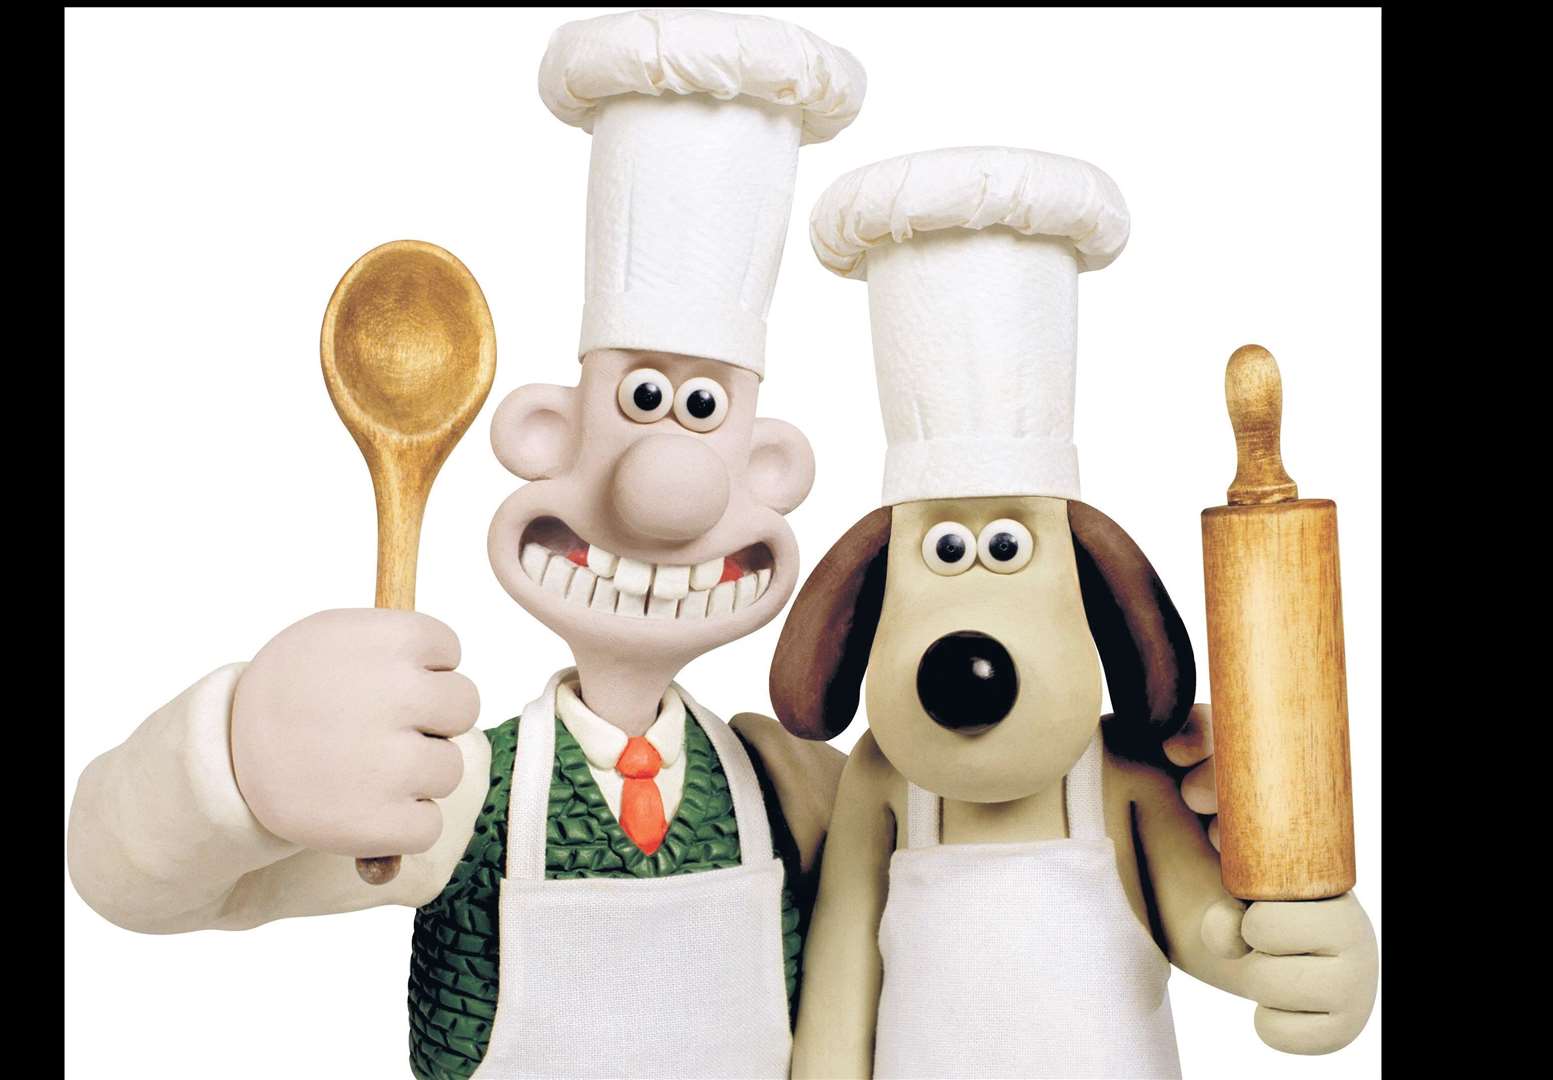 You can celebrate 30 years of Wallace and Gromit at Chiddingstone Castle